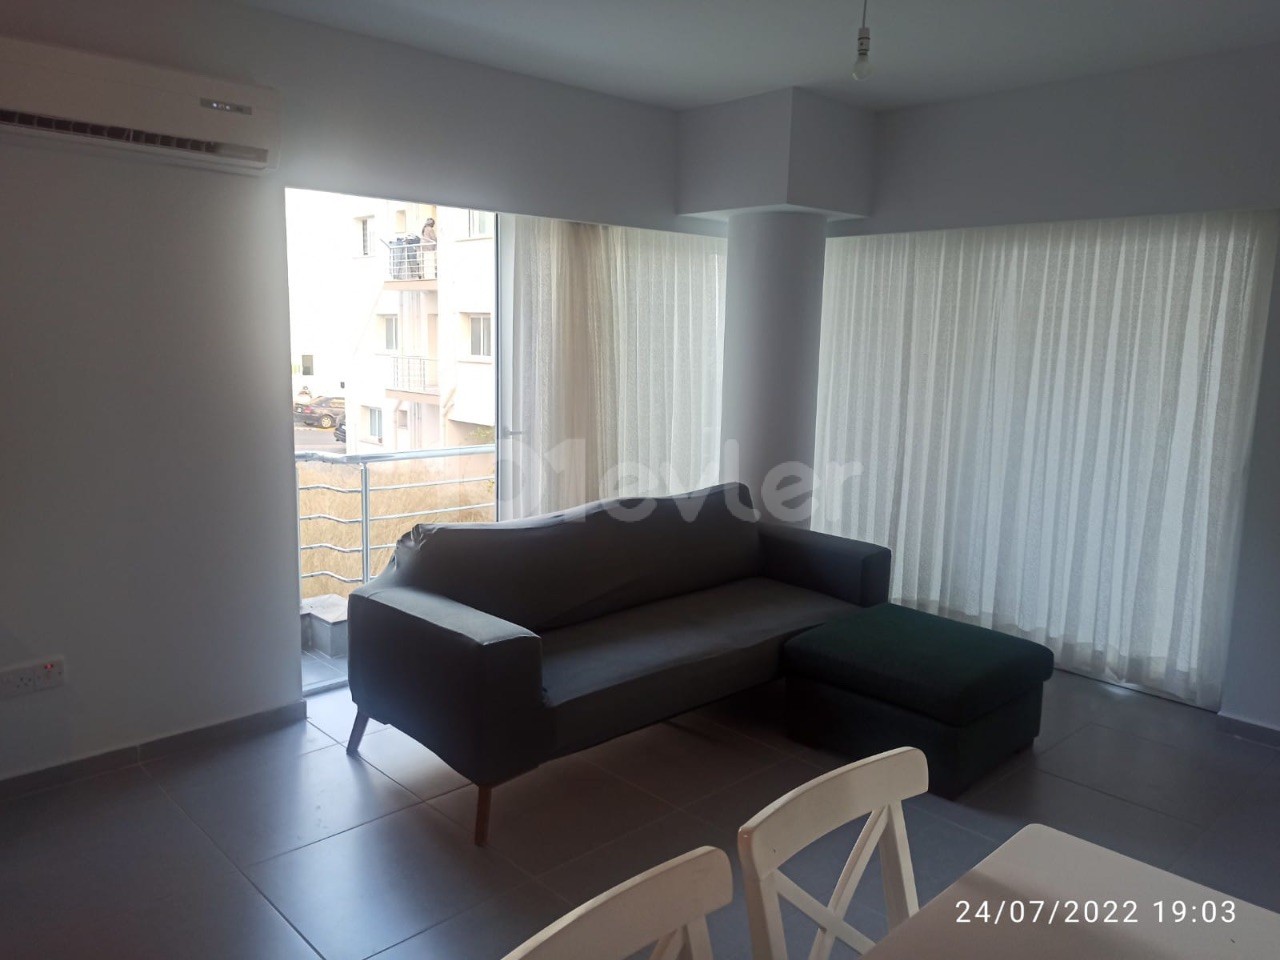 1 + 1 Apartment for Rent in the Center of Kyrenia ** 